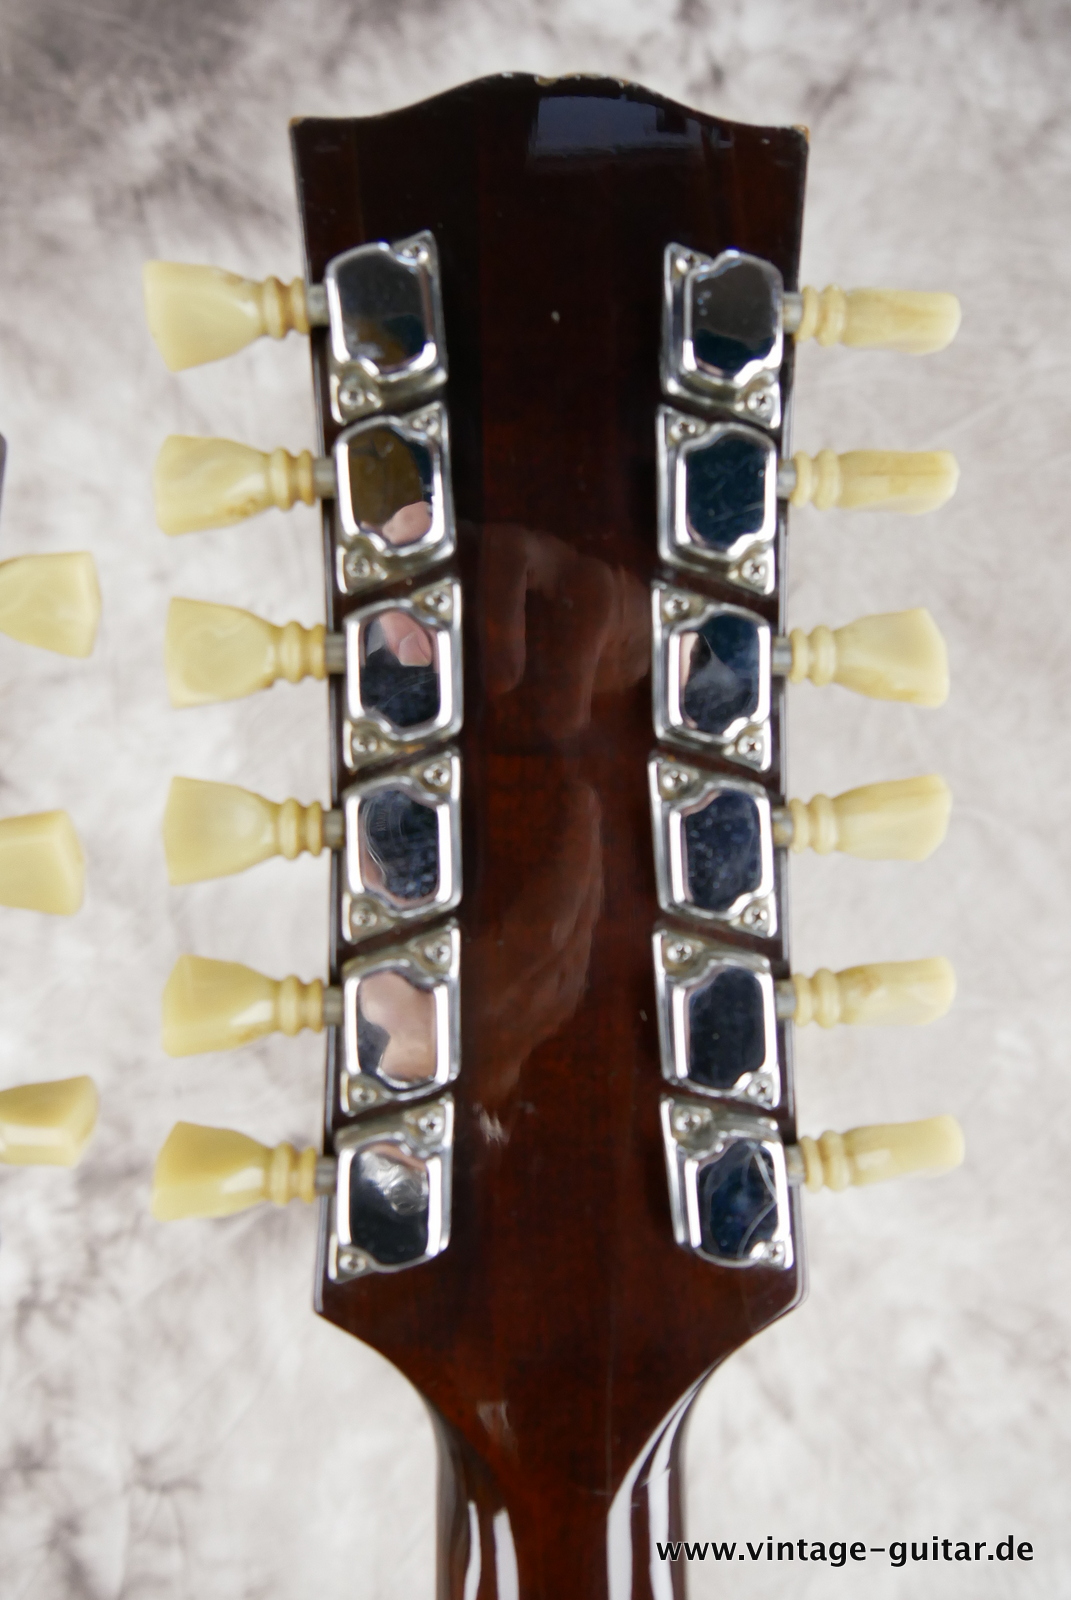 Ibanez_Mod_2402_double_neck_12string_6string_sgstyle_sg_style_1970_70s_stairway_to_heaven-016.JPG